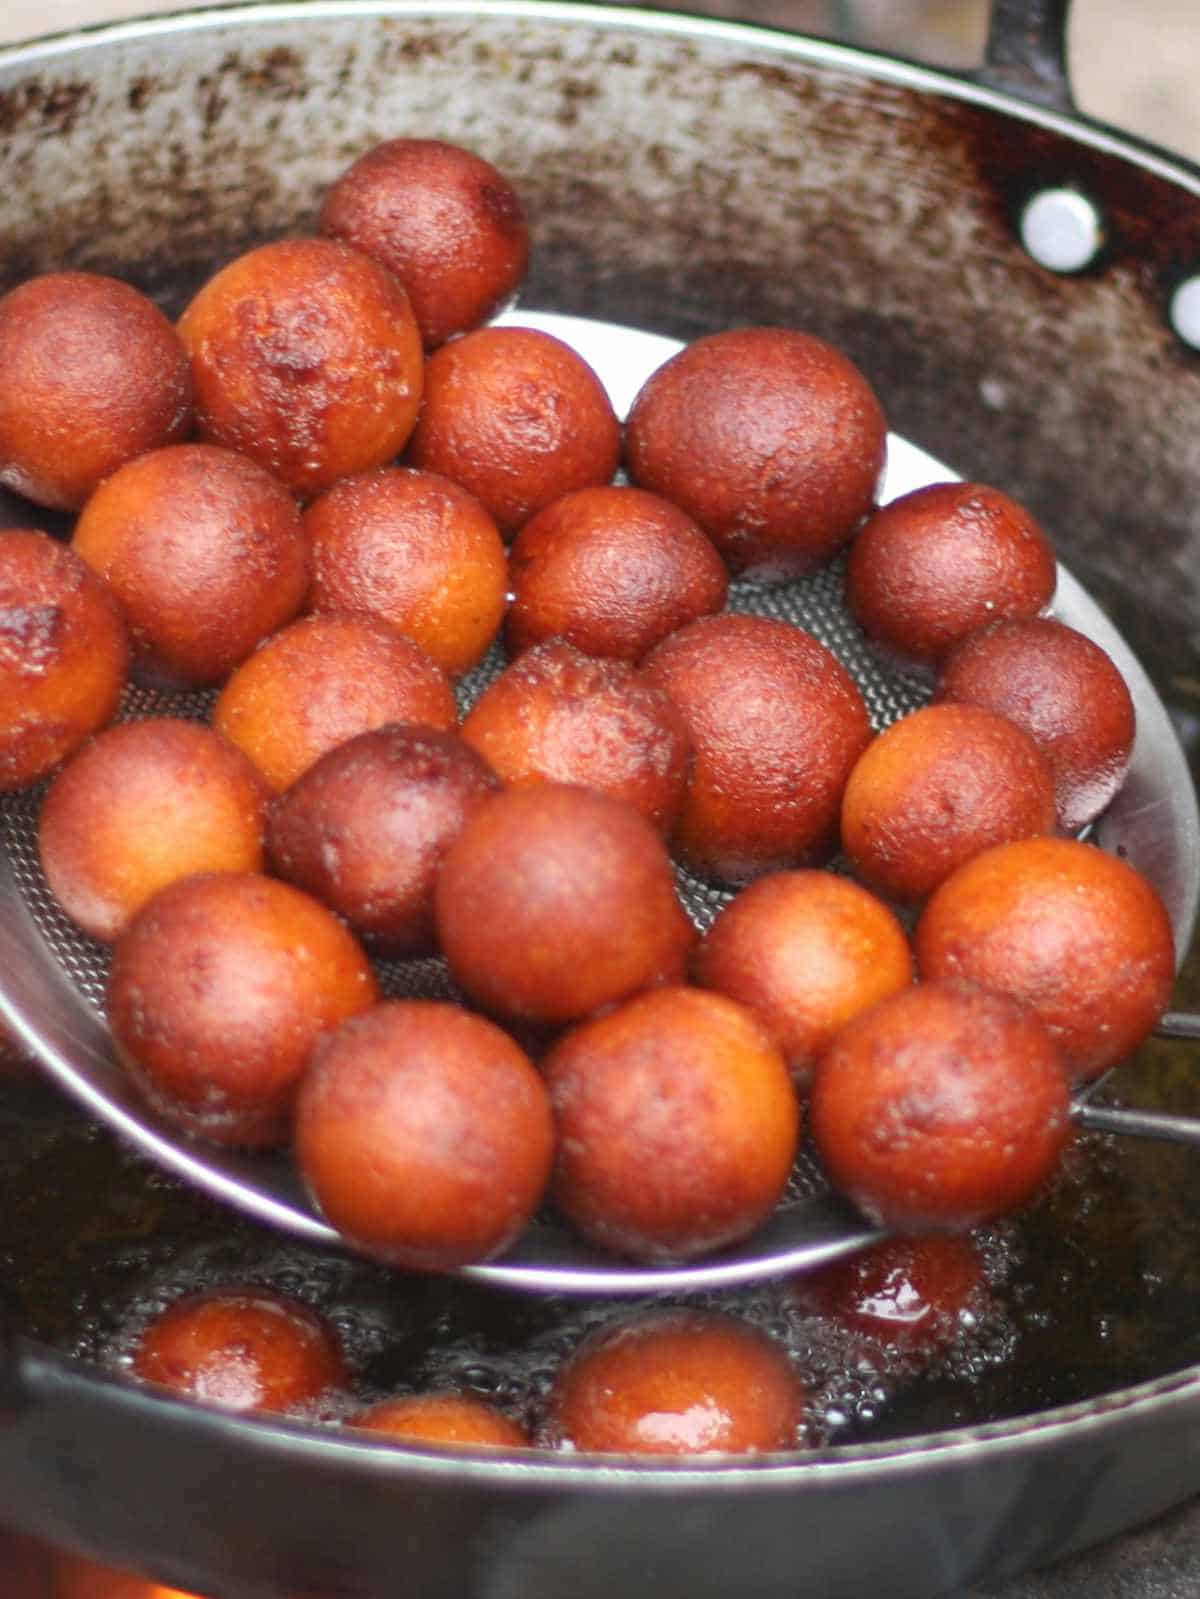 A traditional sweet dish called "Gulab Jamun" for mothers day.